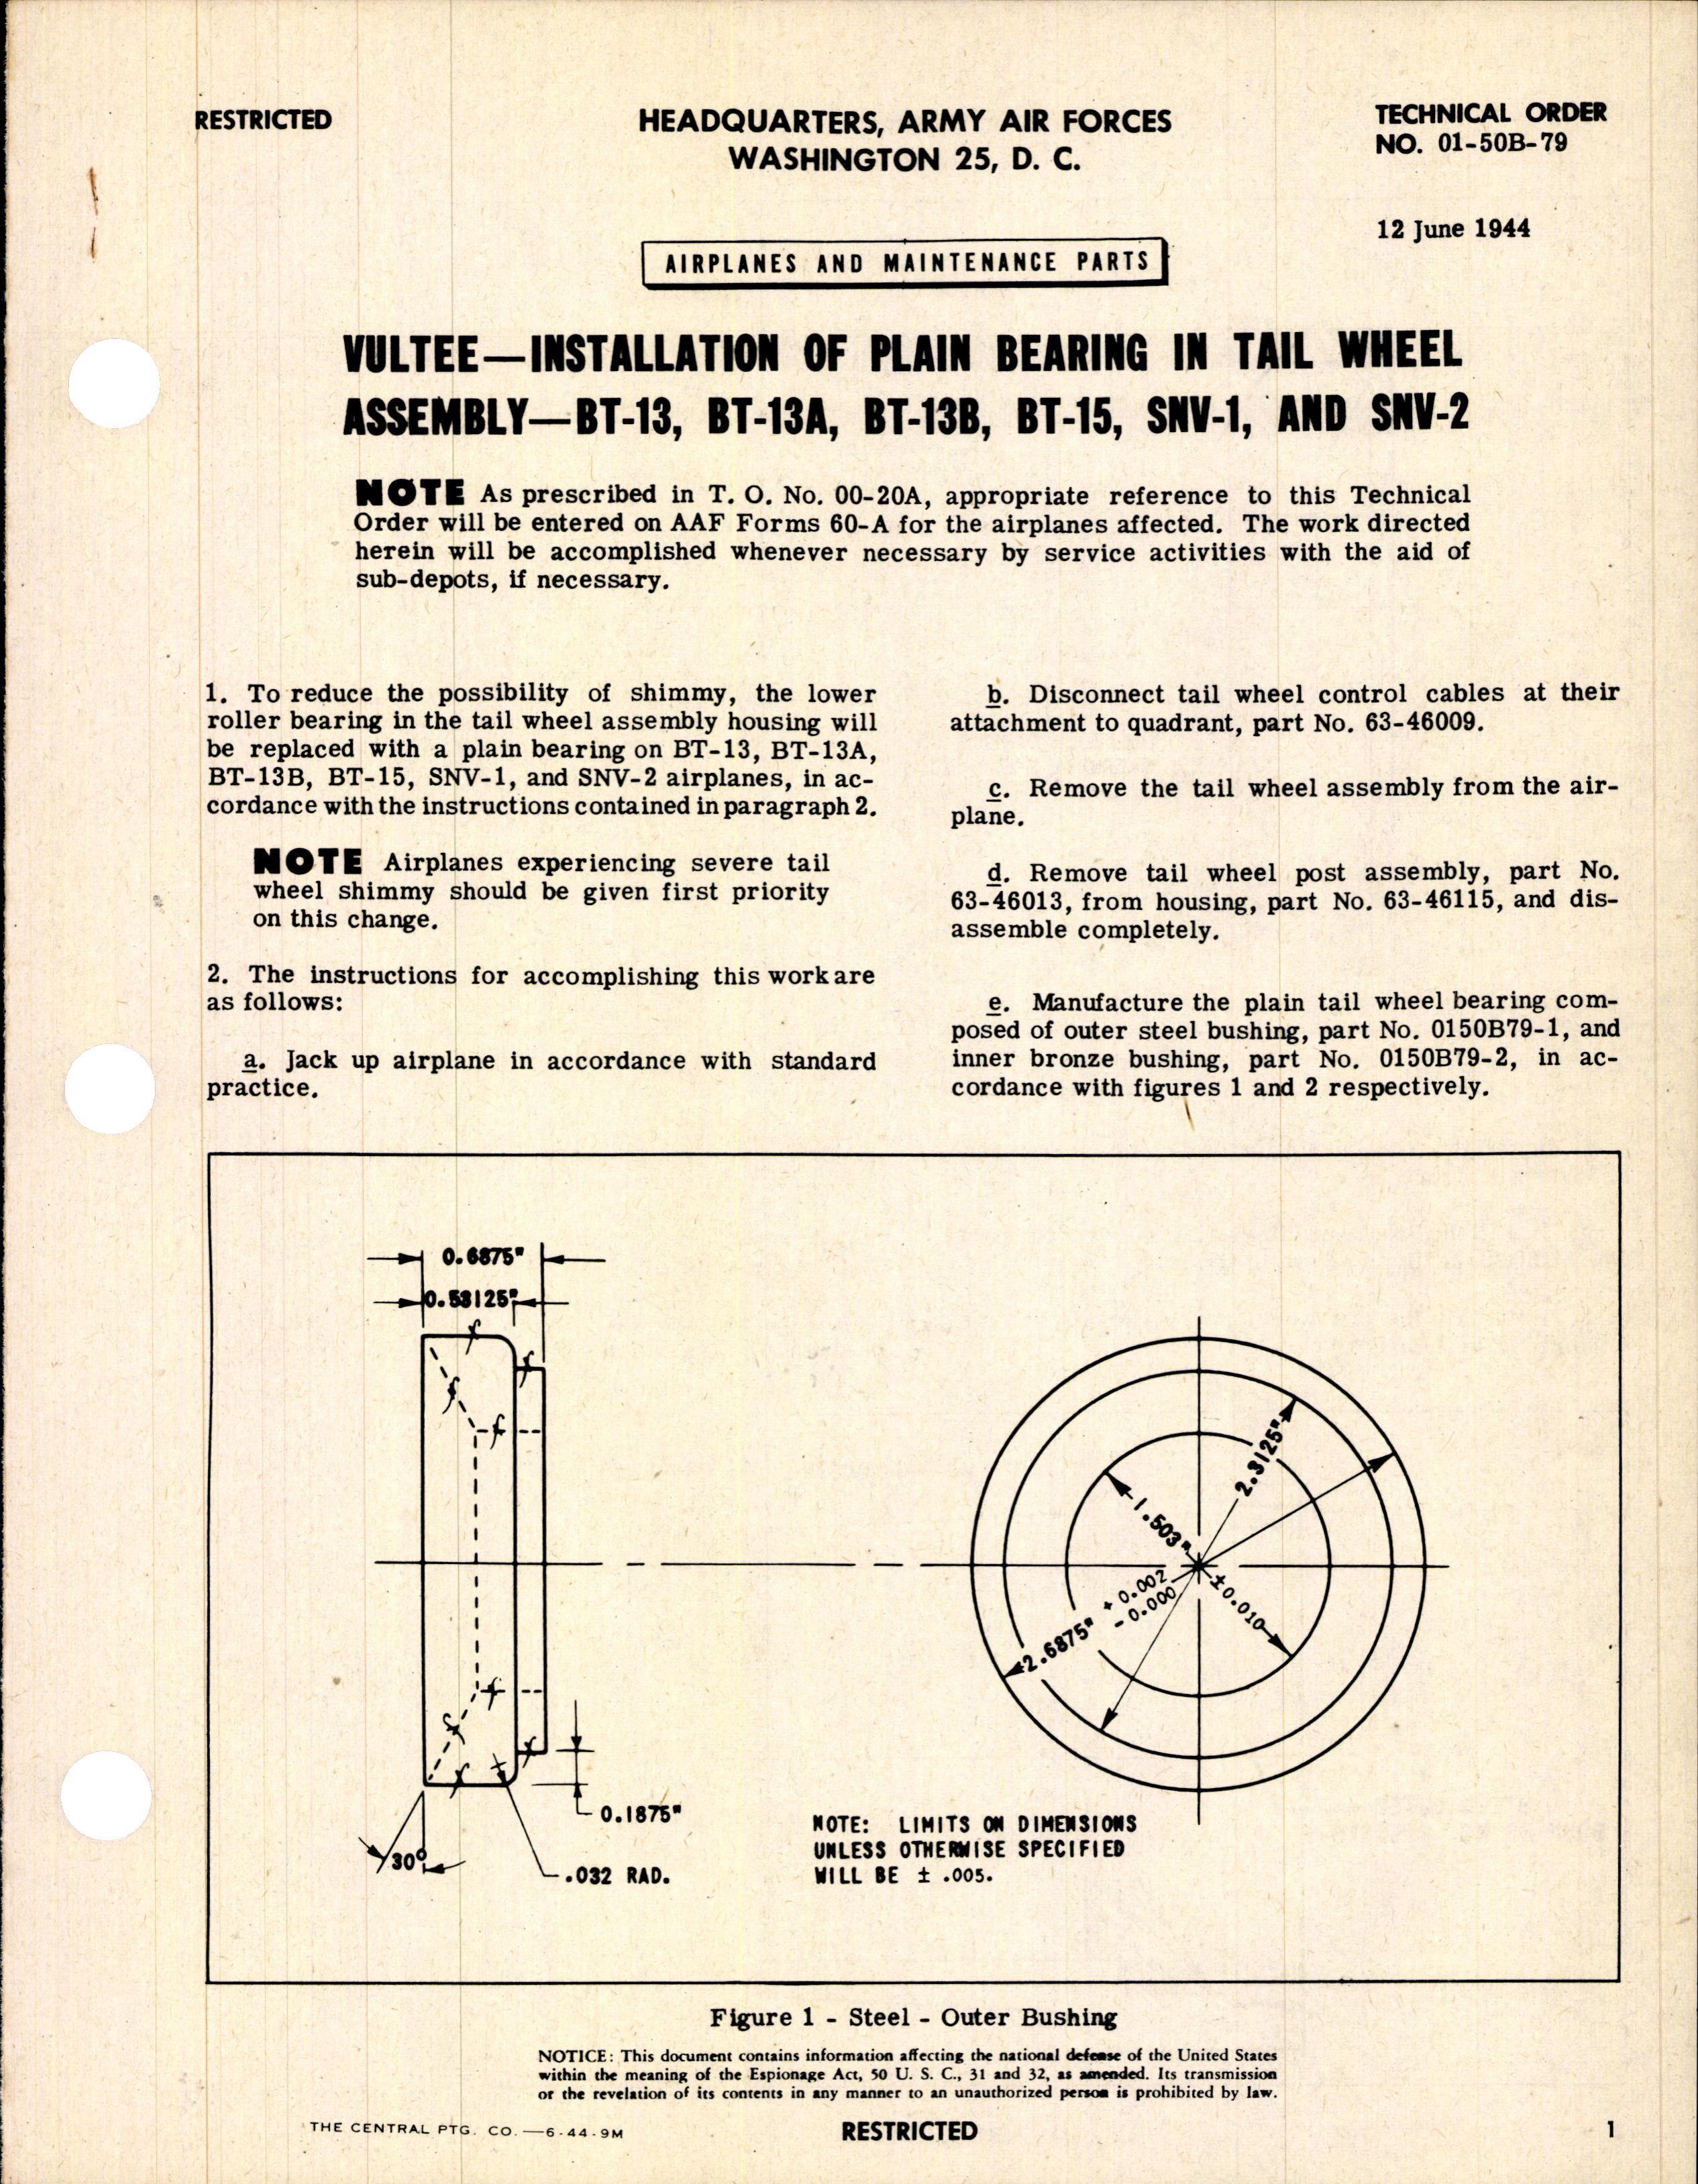 Sample page 1 from AirCorps Library document: Installation of Plain Bearing in Tail Wheel Assembly - BT-13, BT-13A, BT-13B, BT-15, SNV-1, and SNV-2